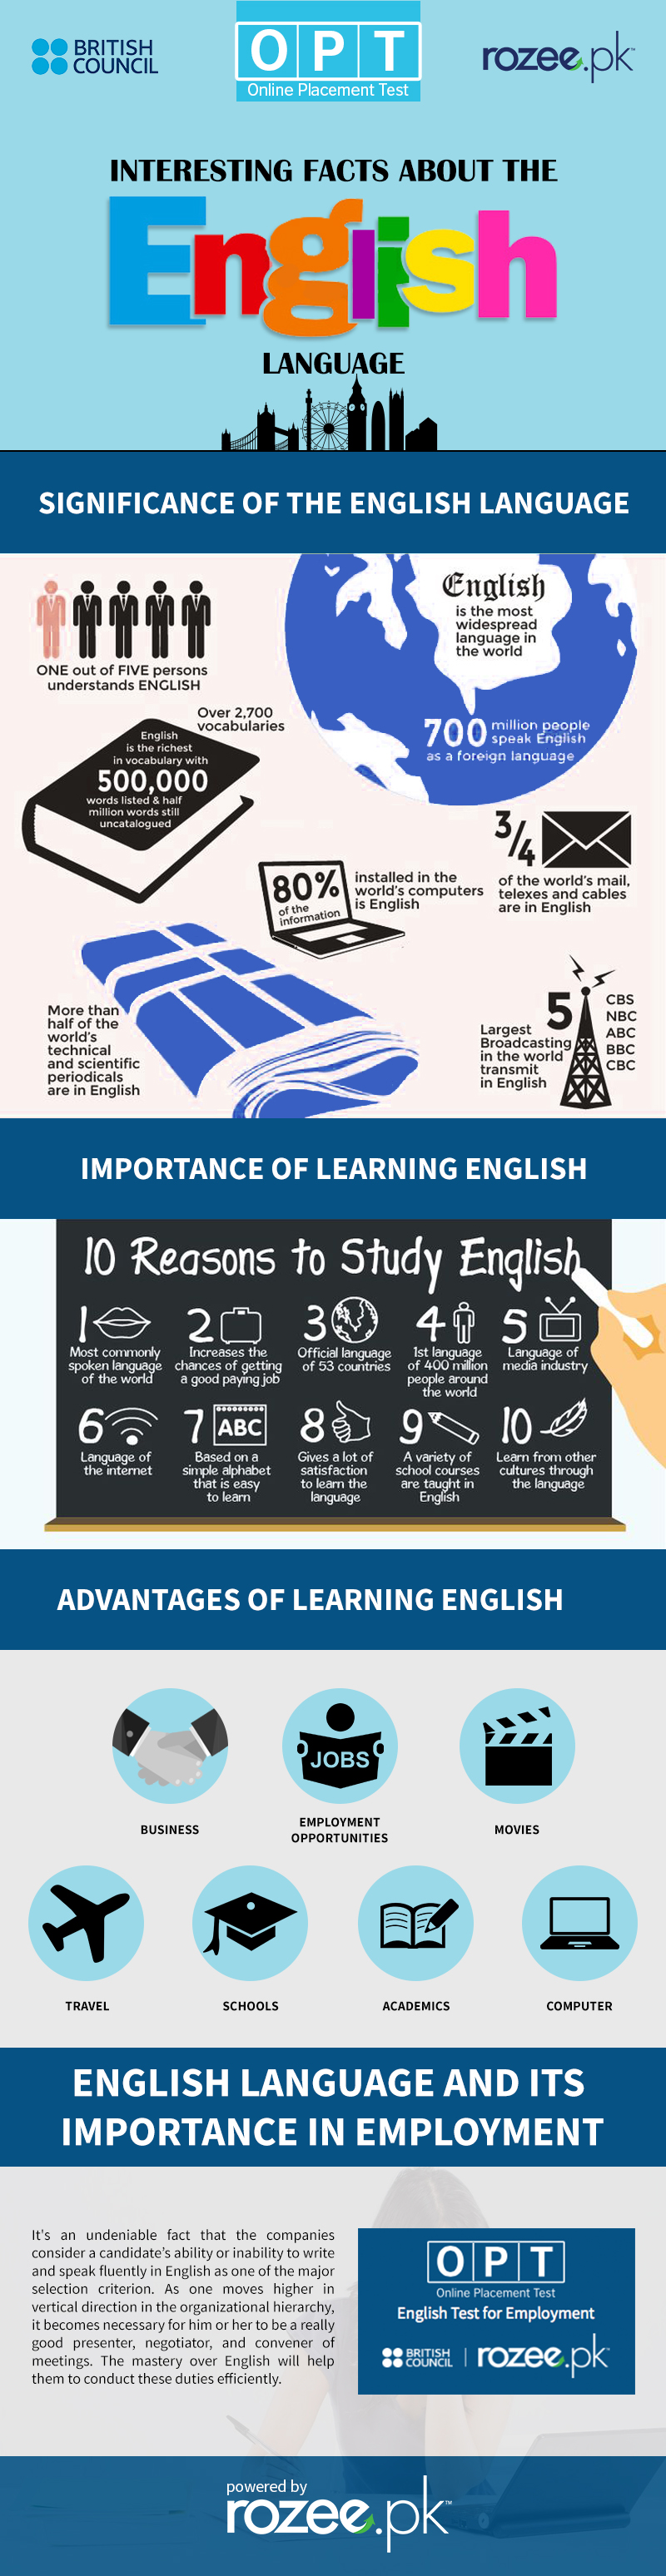 Interesting Facts About the English Language - The Rozee Blog